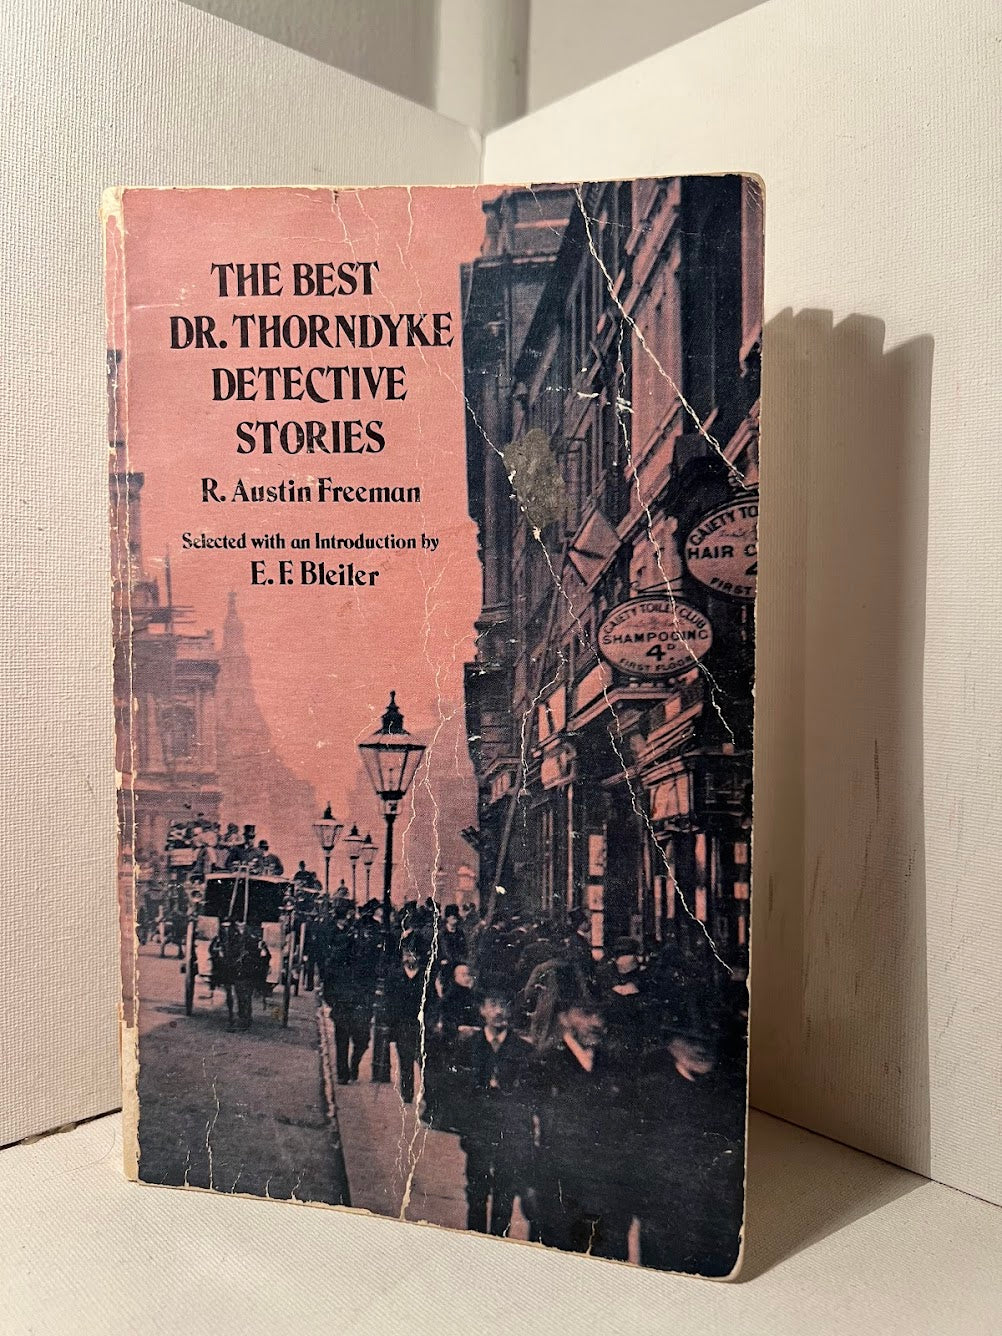 The Best Dr. Thorndyke Detective Stories by R. Austin Freeman